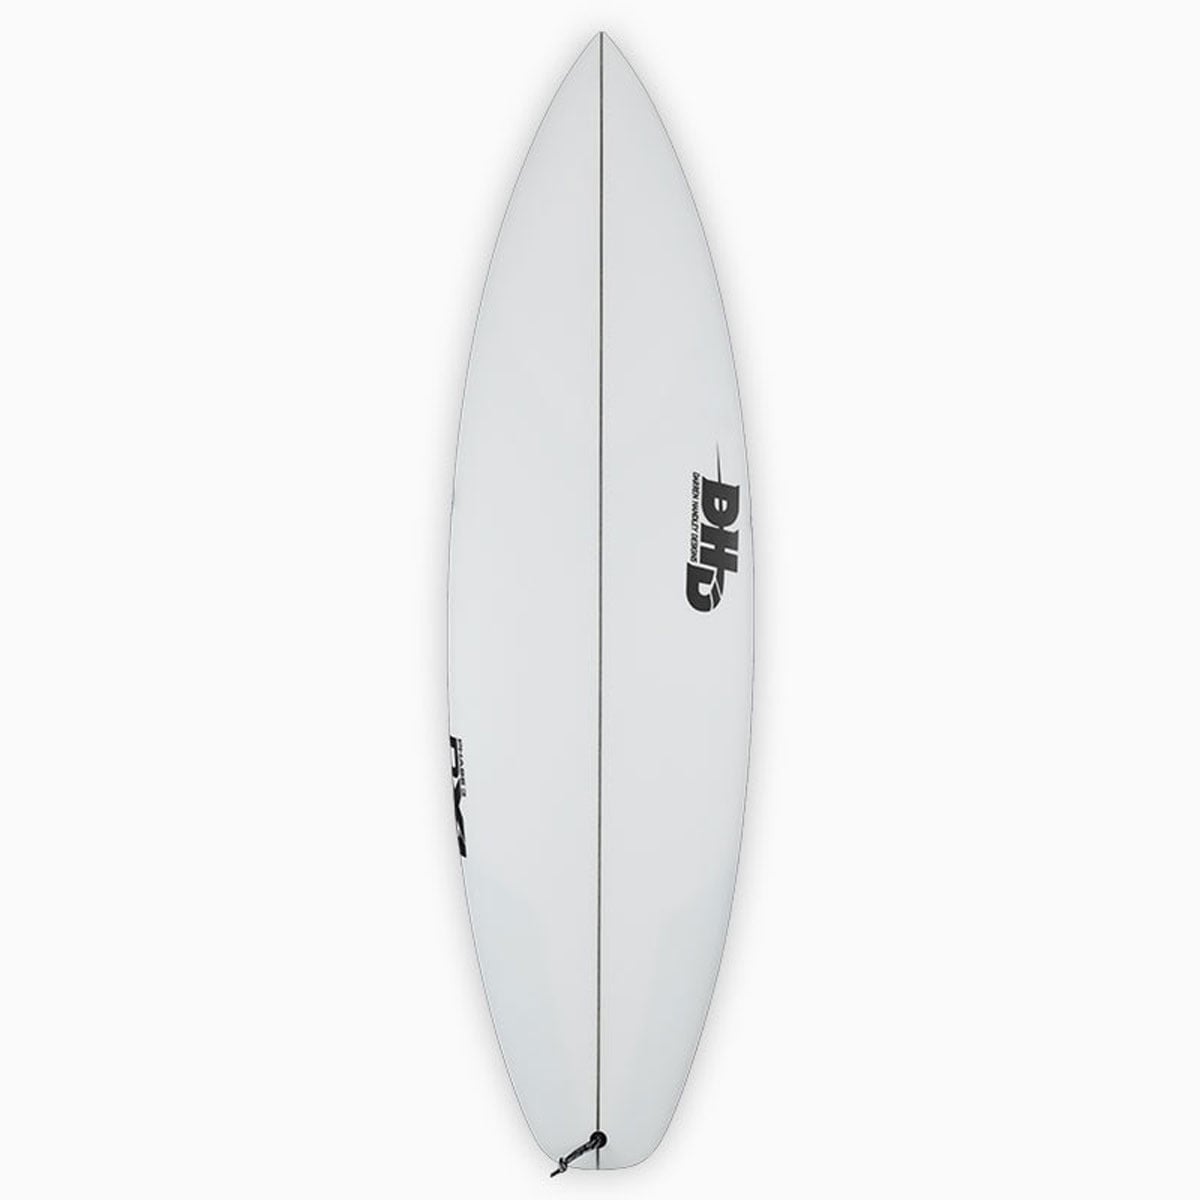 DHD SURFBOARDS DX1 PHASE3 ダレンハンドレーデザイン ディーエックス1 フェーズ3 ショートボード パフォーマンスショート  FCS2 サーフボード トライフィン クリア 5.8